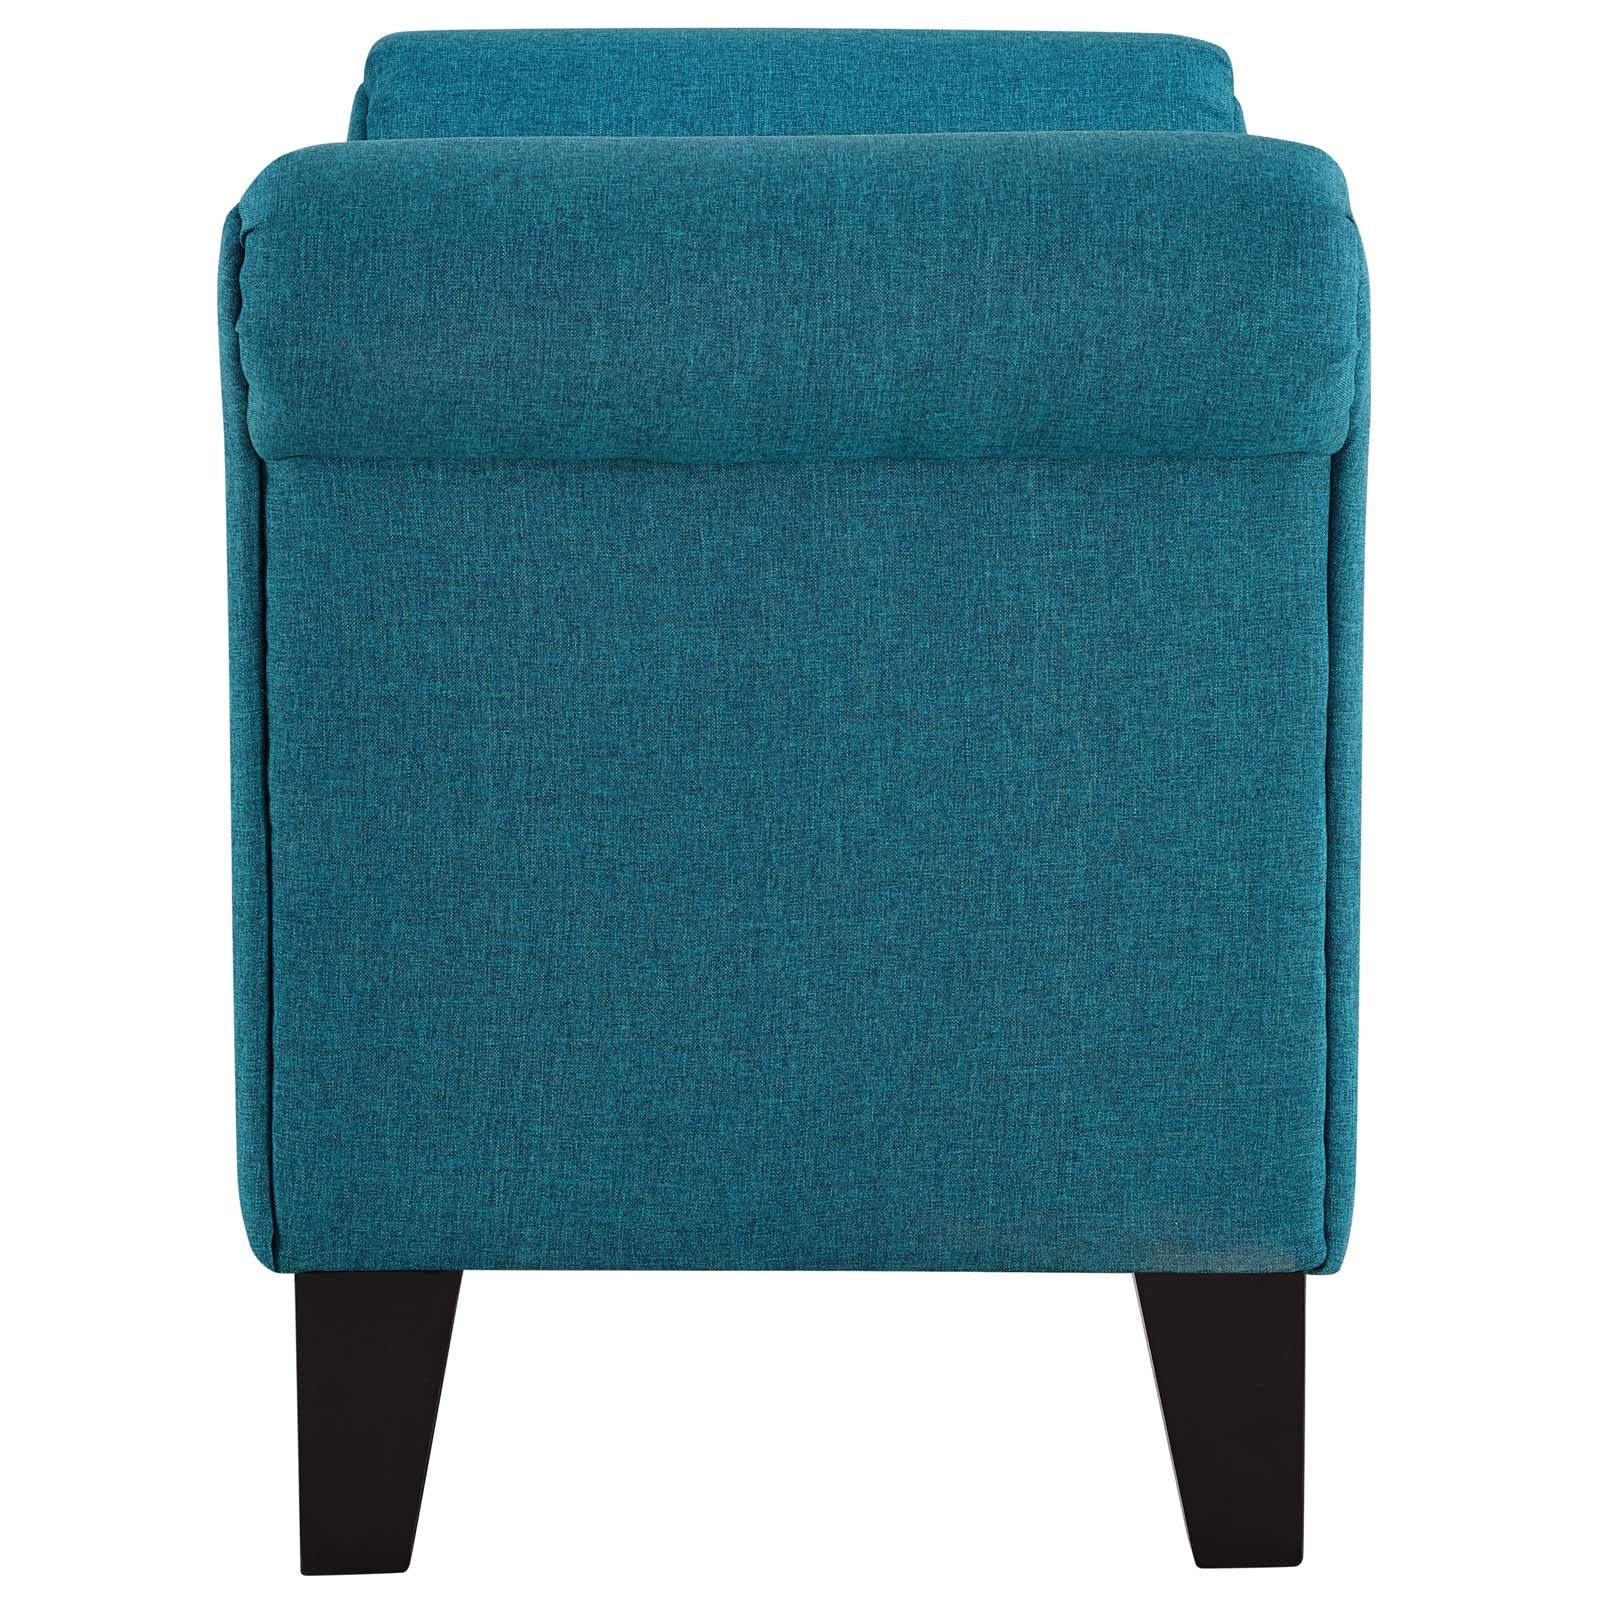 Modway Benches - Rendezvous Bench Teal